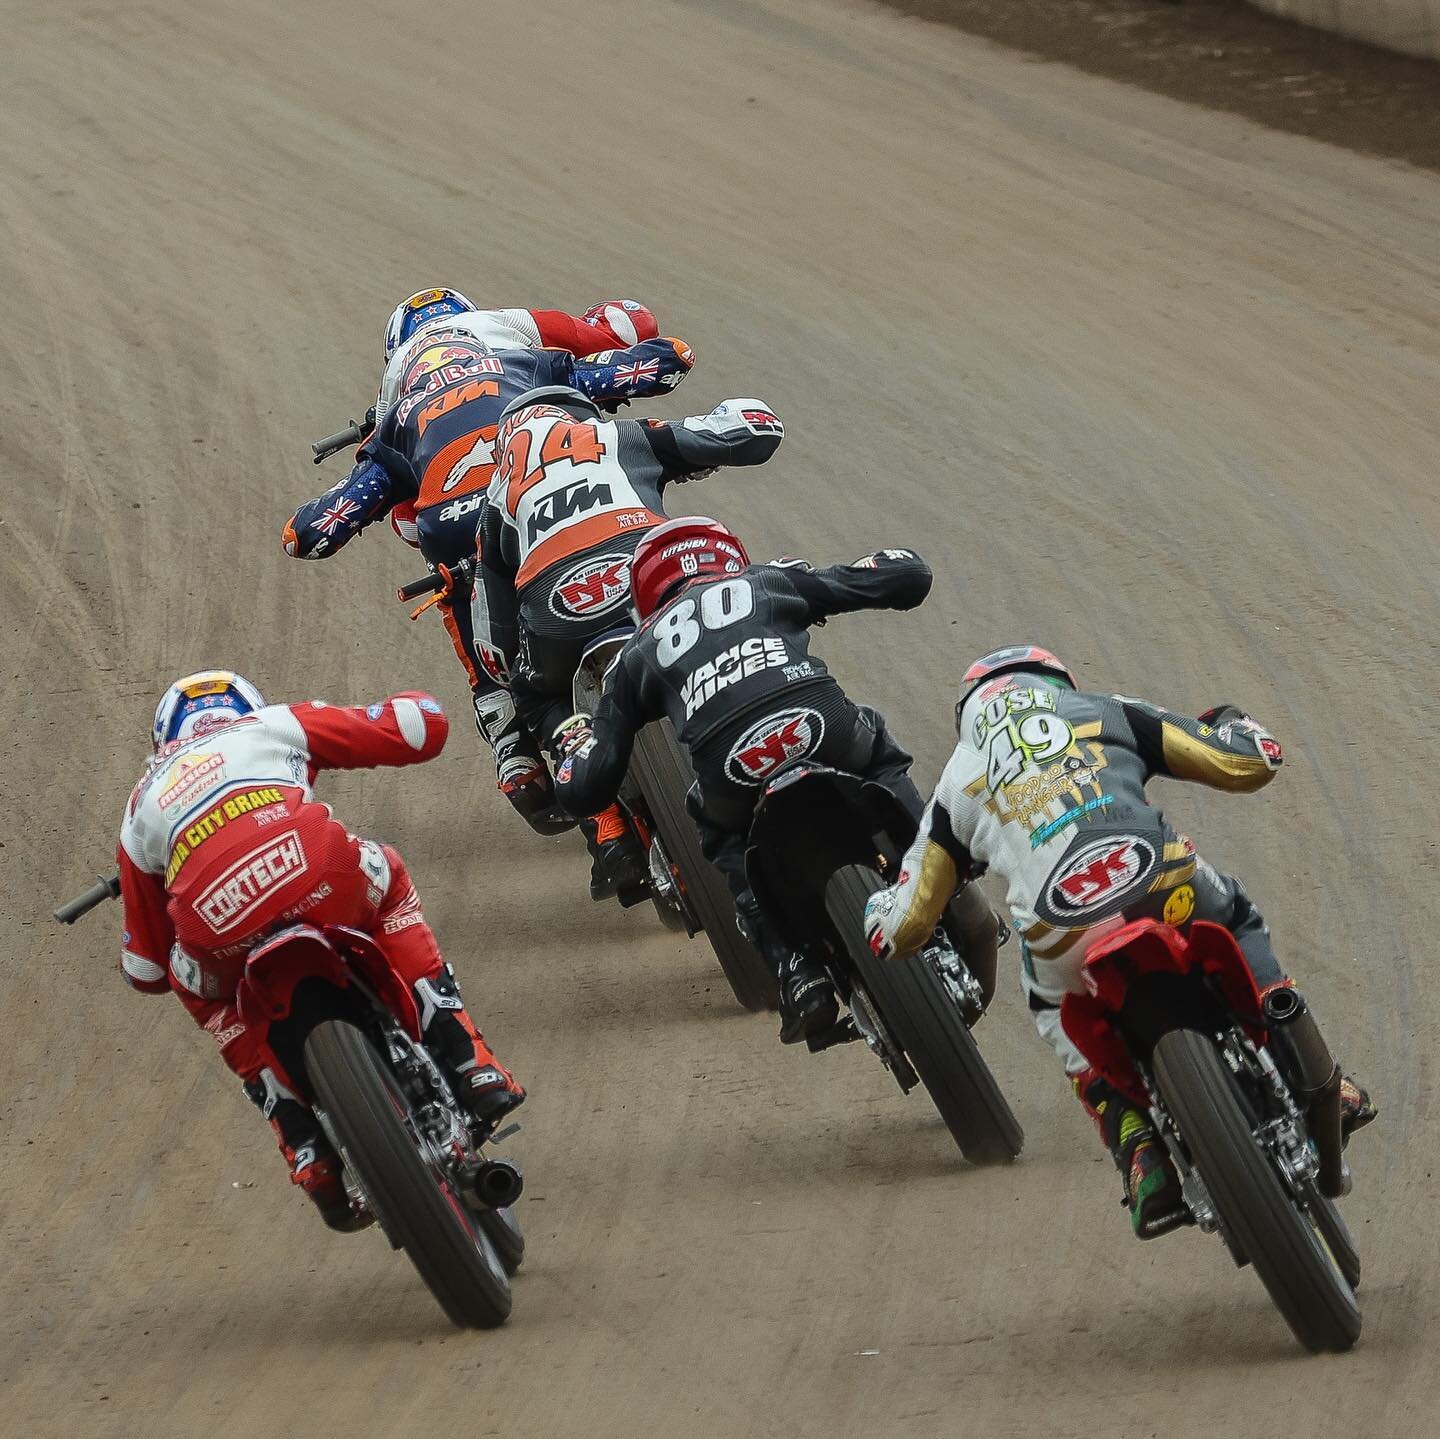 They say &ldquo;well that&rsquo;s racing&rdquo;. And it&rsquo;s true. Rain definitely ruined what was shaping up to be an epic weekend @americanflattrack Springfield Mile double-header. Vibes were high, our bikes were dialled, track was great and Hun